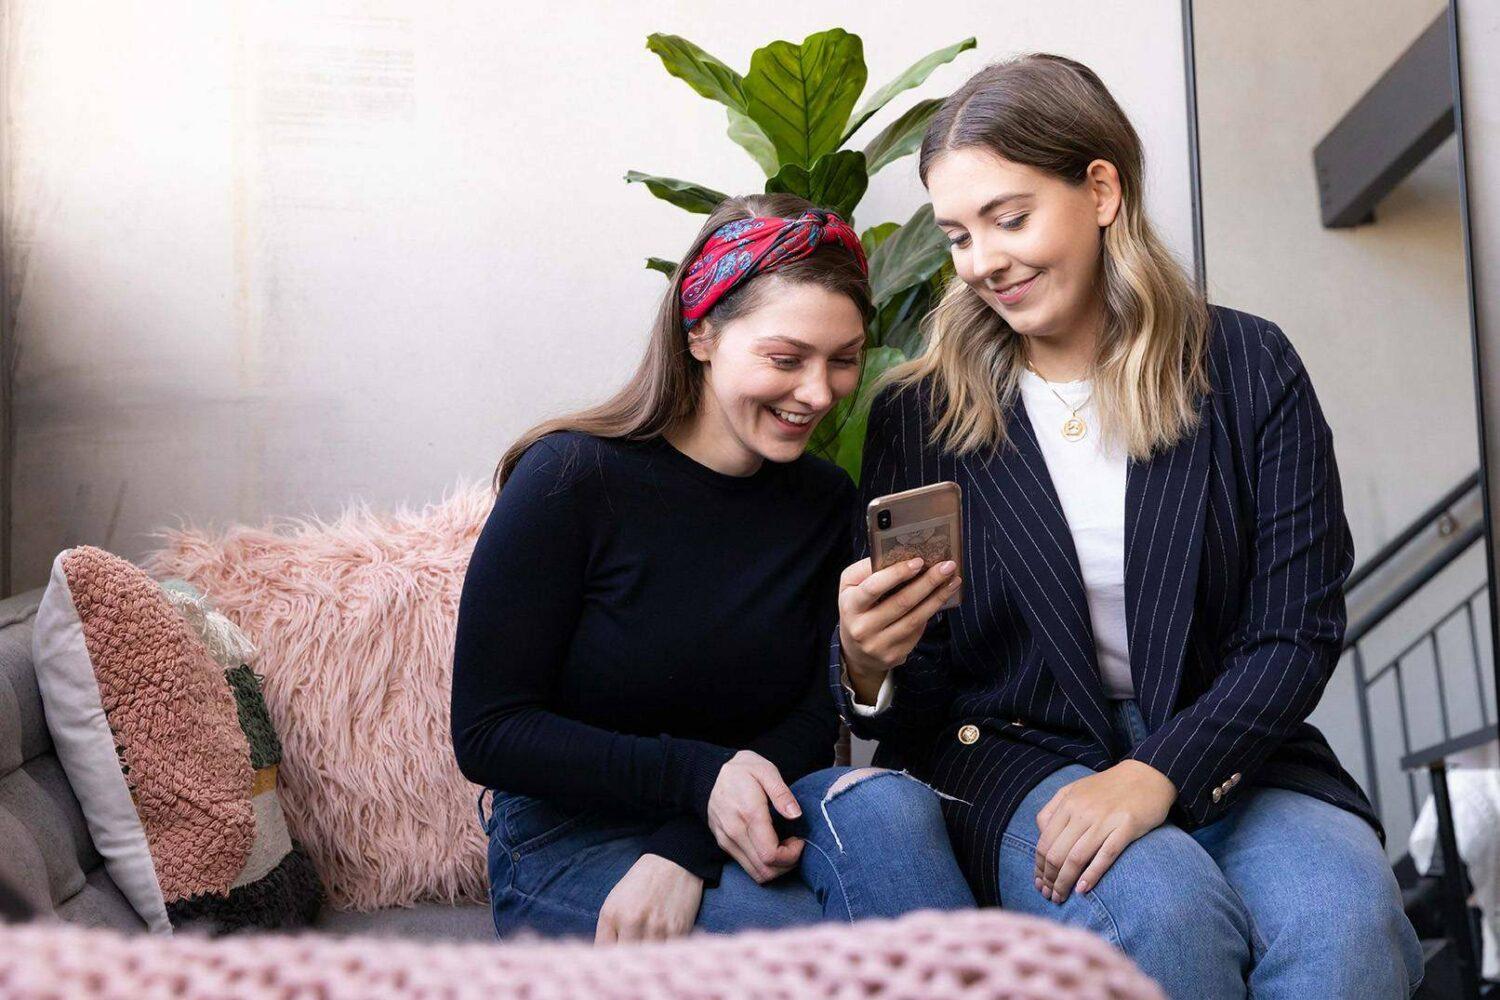 If you run a business or work in marketing you've no doubt heard the news - Instagram has removed visible 'likes' in Australia, in a new trial to combat mental health issues.